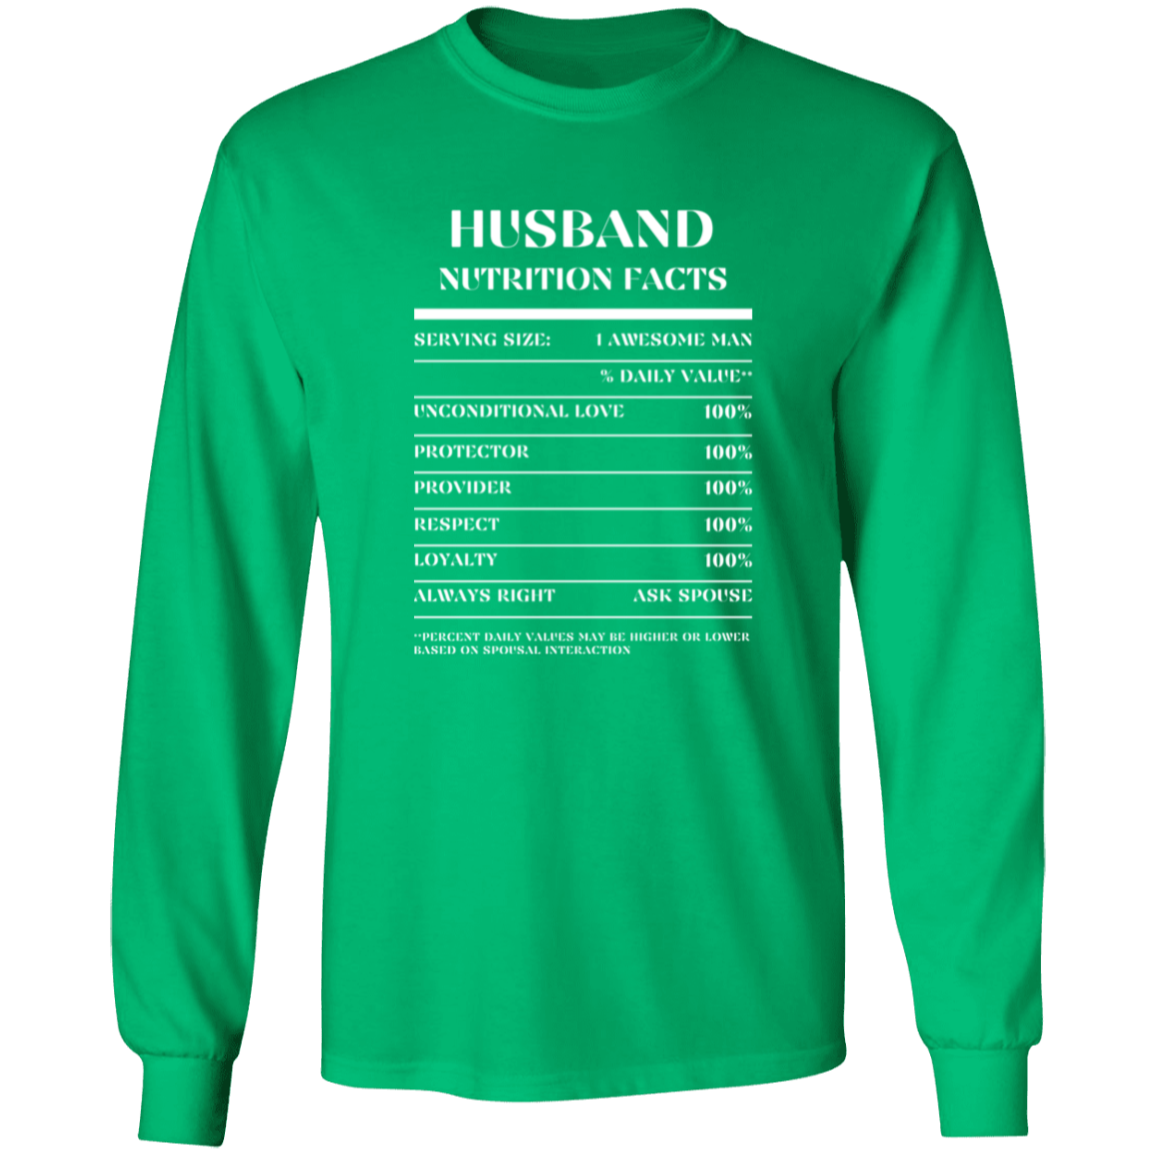 Nutrition Facts T-Shirt LS - Husband - White